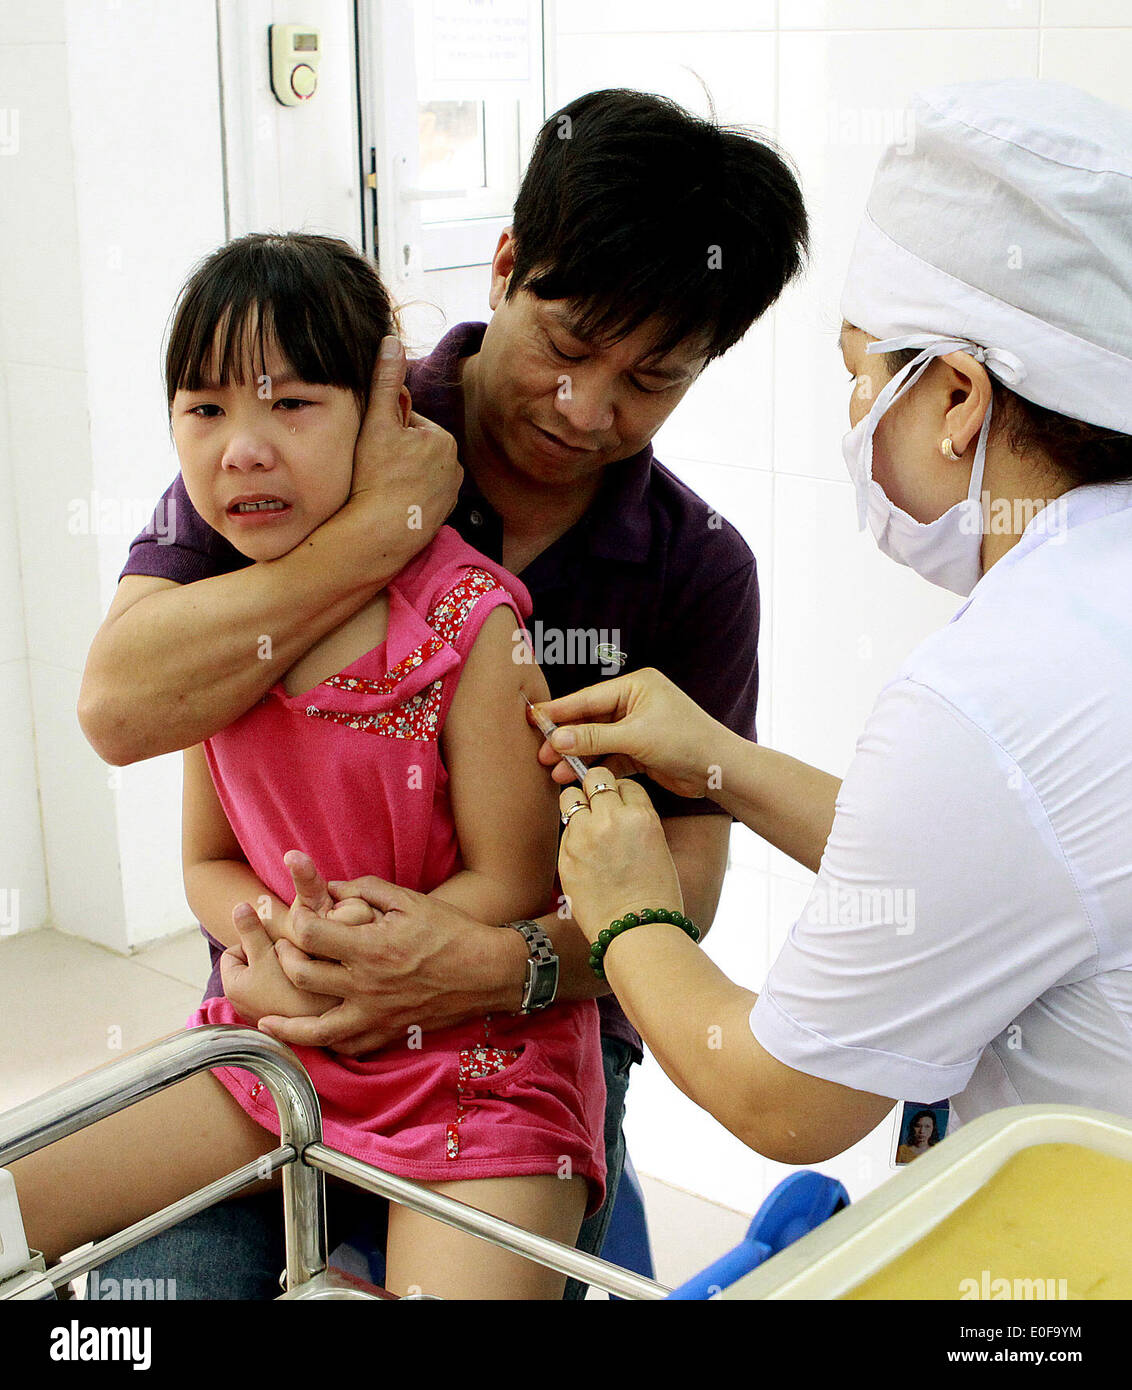 Hanoi, Vietnam. 12th May, 2014. A girl is vaccinated against measles in Hanoi, capital of Vietnam, May 12, 2014. Hanoi medical authority organized measles vaccination for some 50,000-60,000 children aged 2-10 years old from May 12 to 16. According to statistics by Vietnam's Ministry of Health, by April 15, 2014, the country reported over 3,000 measles cases in 61 out of 63 provinces and cities. © VNA/Xinhua/Alamy Live News Stock Photo